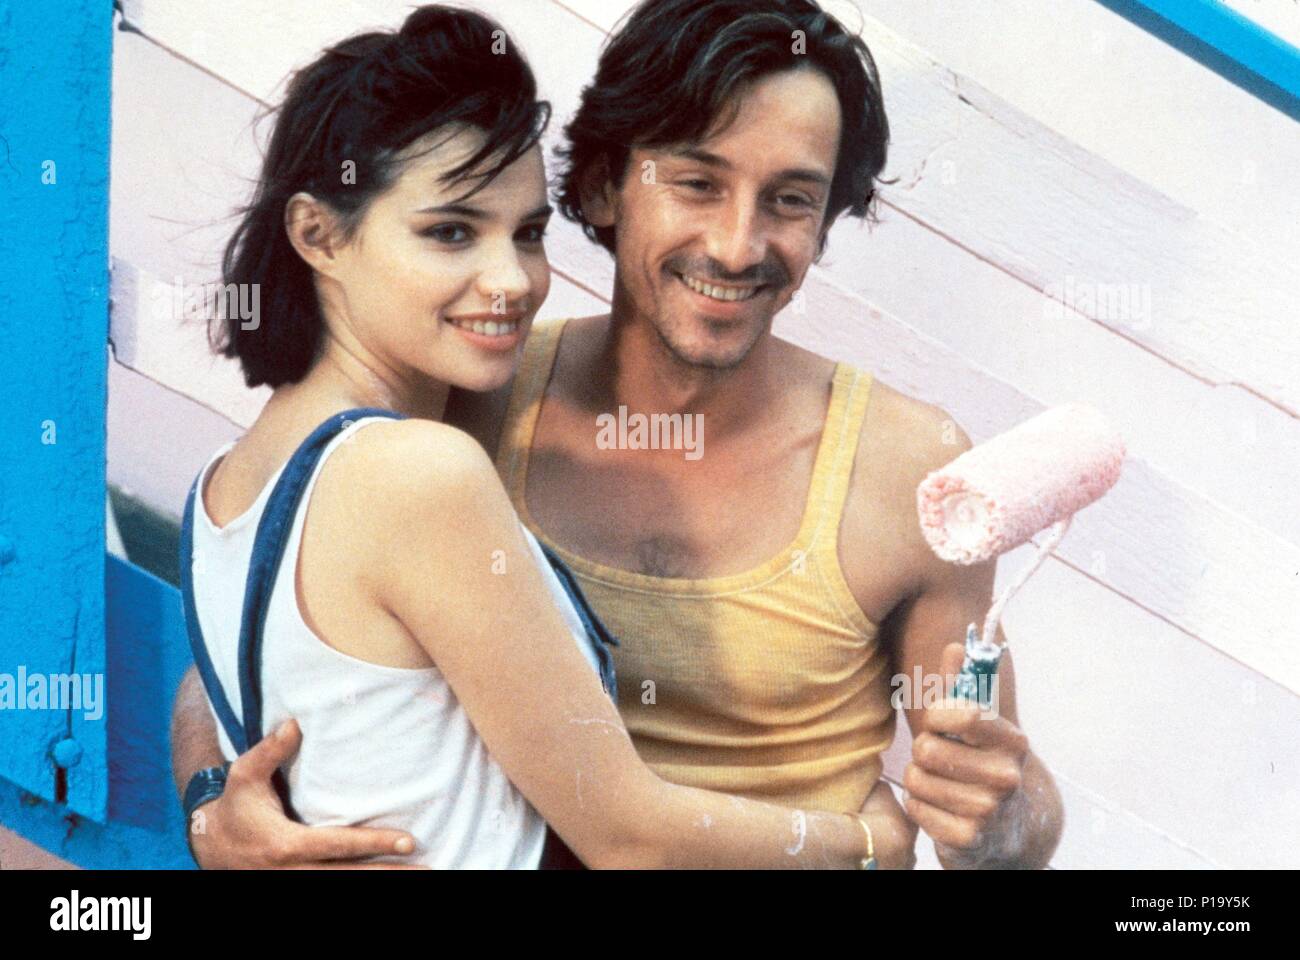 Original Film Title: 37°2 LE MATIN.  English Title: BETTY BLUE.  Film Director: JEAN-JACQUES BEINEIX.  Year: 1986.  Stars: JEAN-HUGUES ANGLADE; BEATRICE DALLE. Credit: CONSTELLATION-CARGO/ALIVE / Album Stock Photo